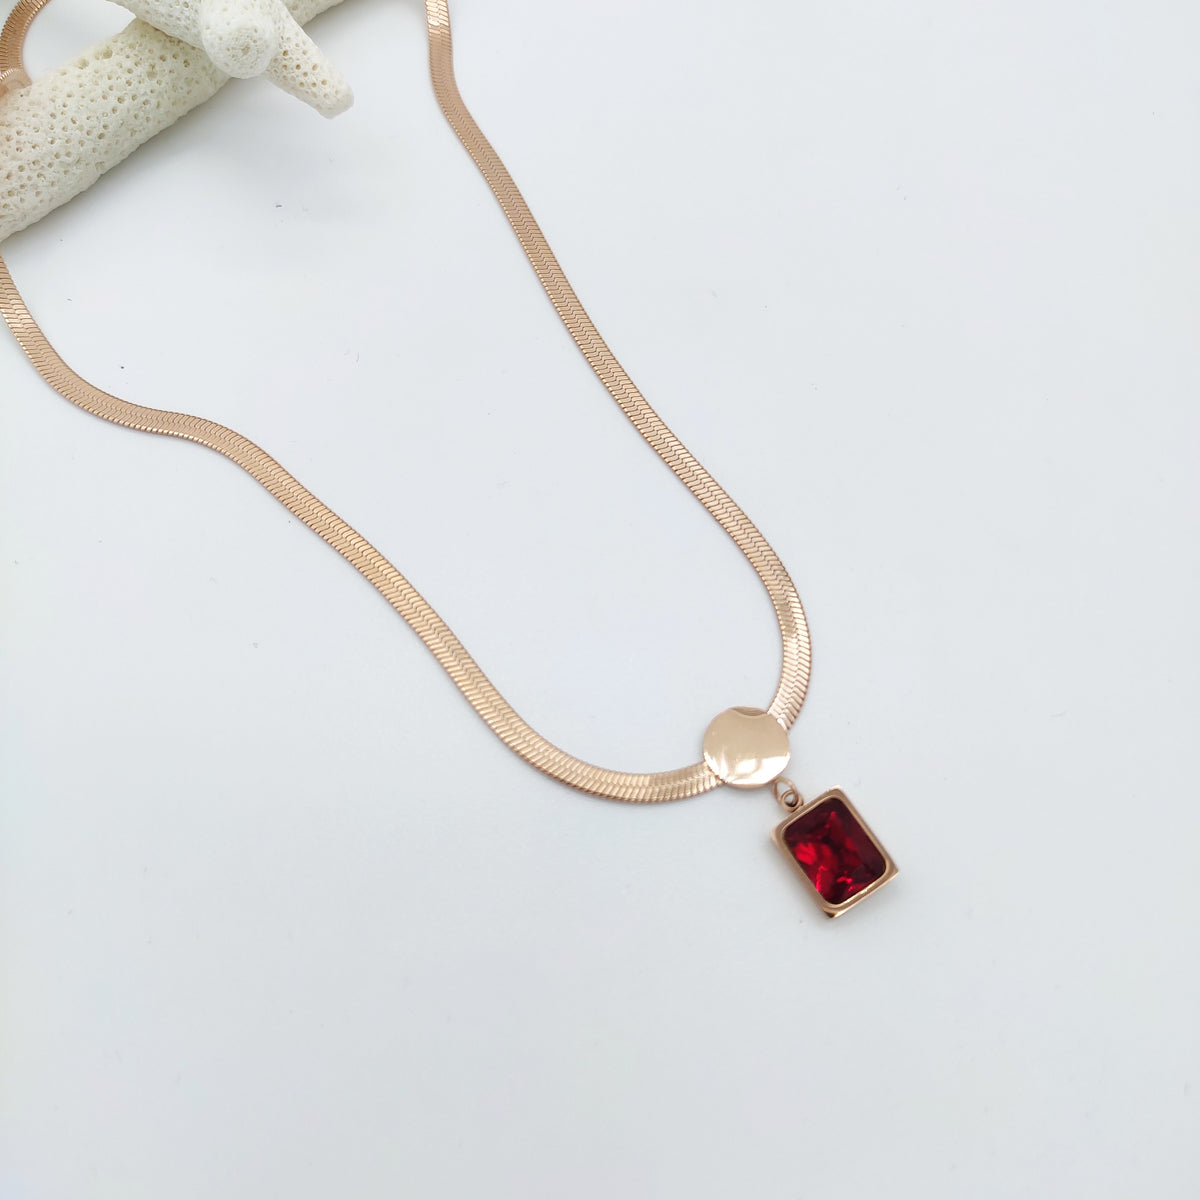 NATURAL STONE CLAVICLE PENDANT NECKLACE IN RECTANGLE SHAPE